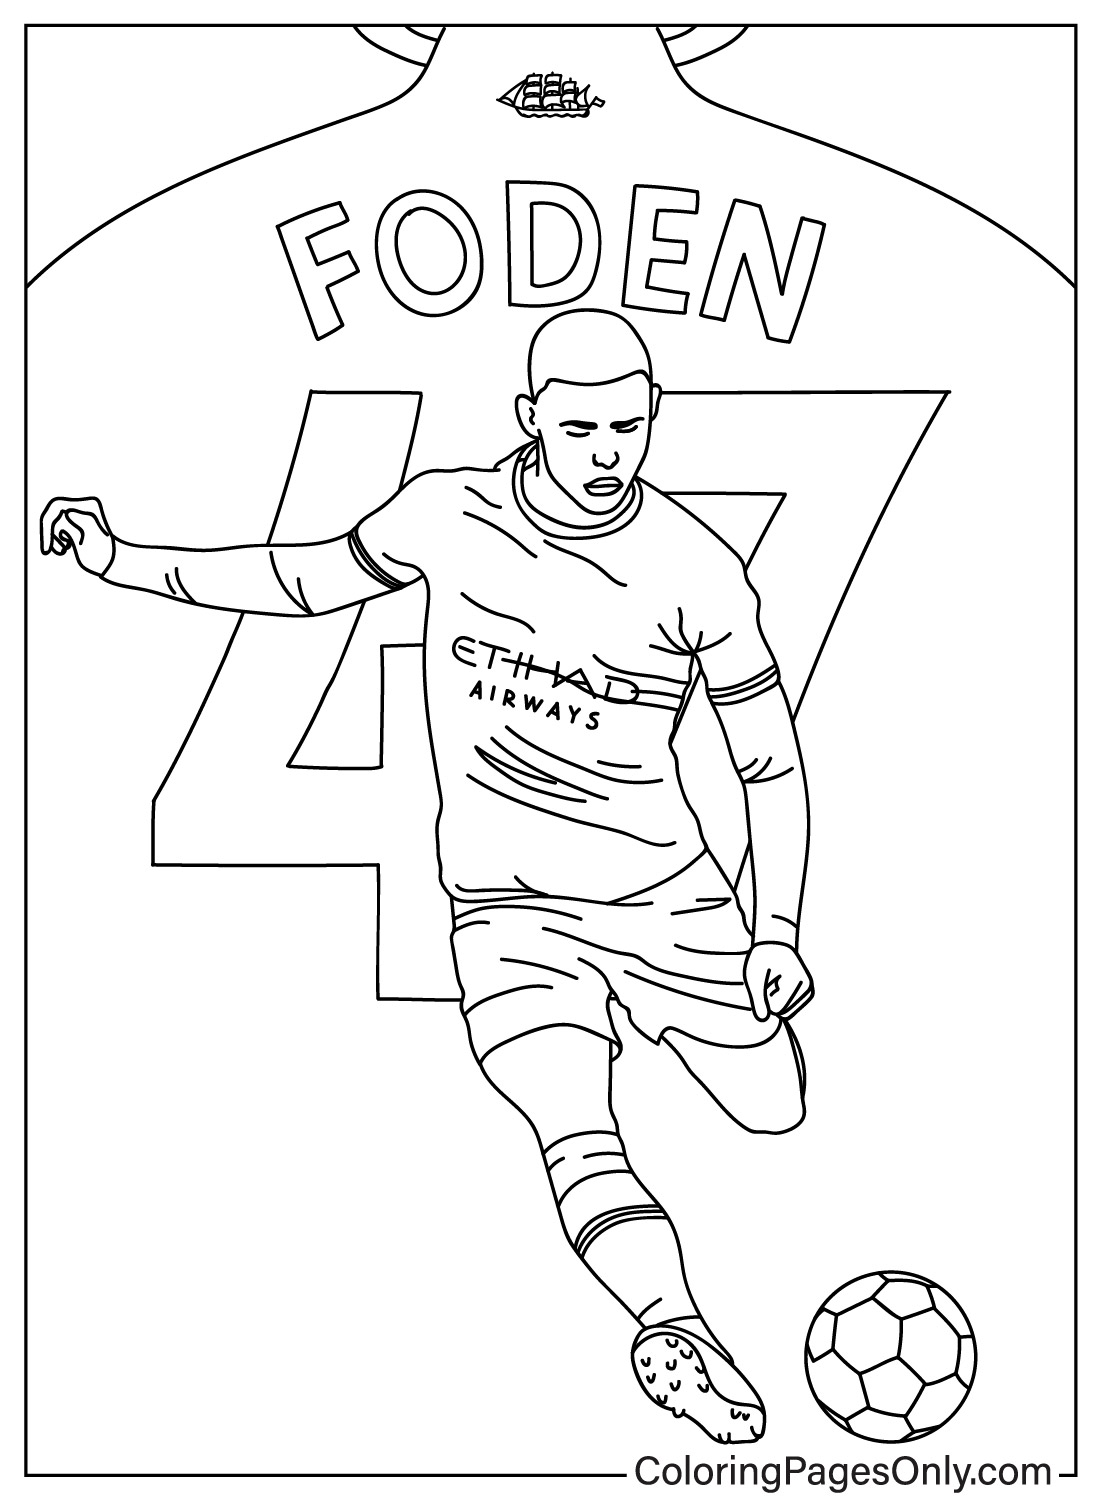 Phil Foden coloring pages ...